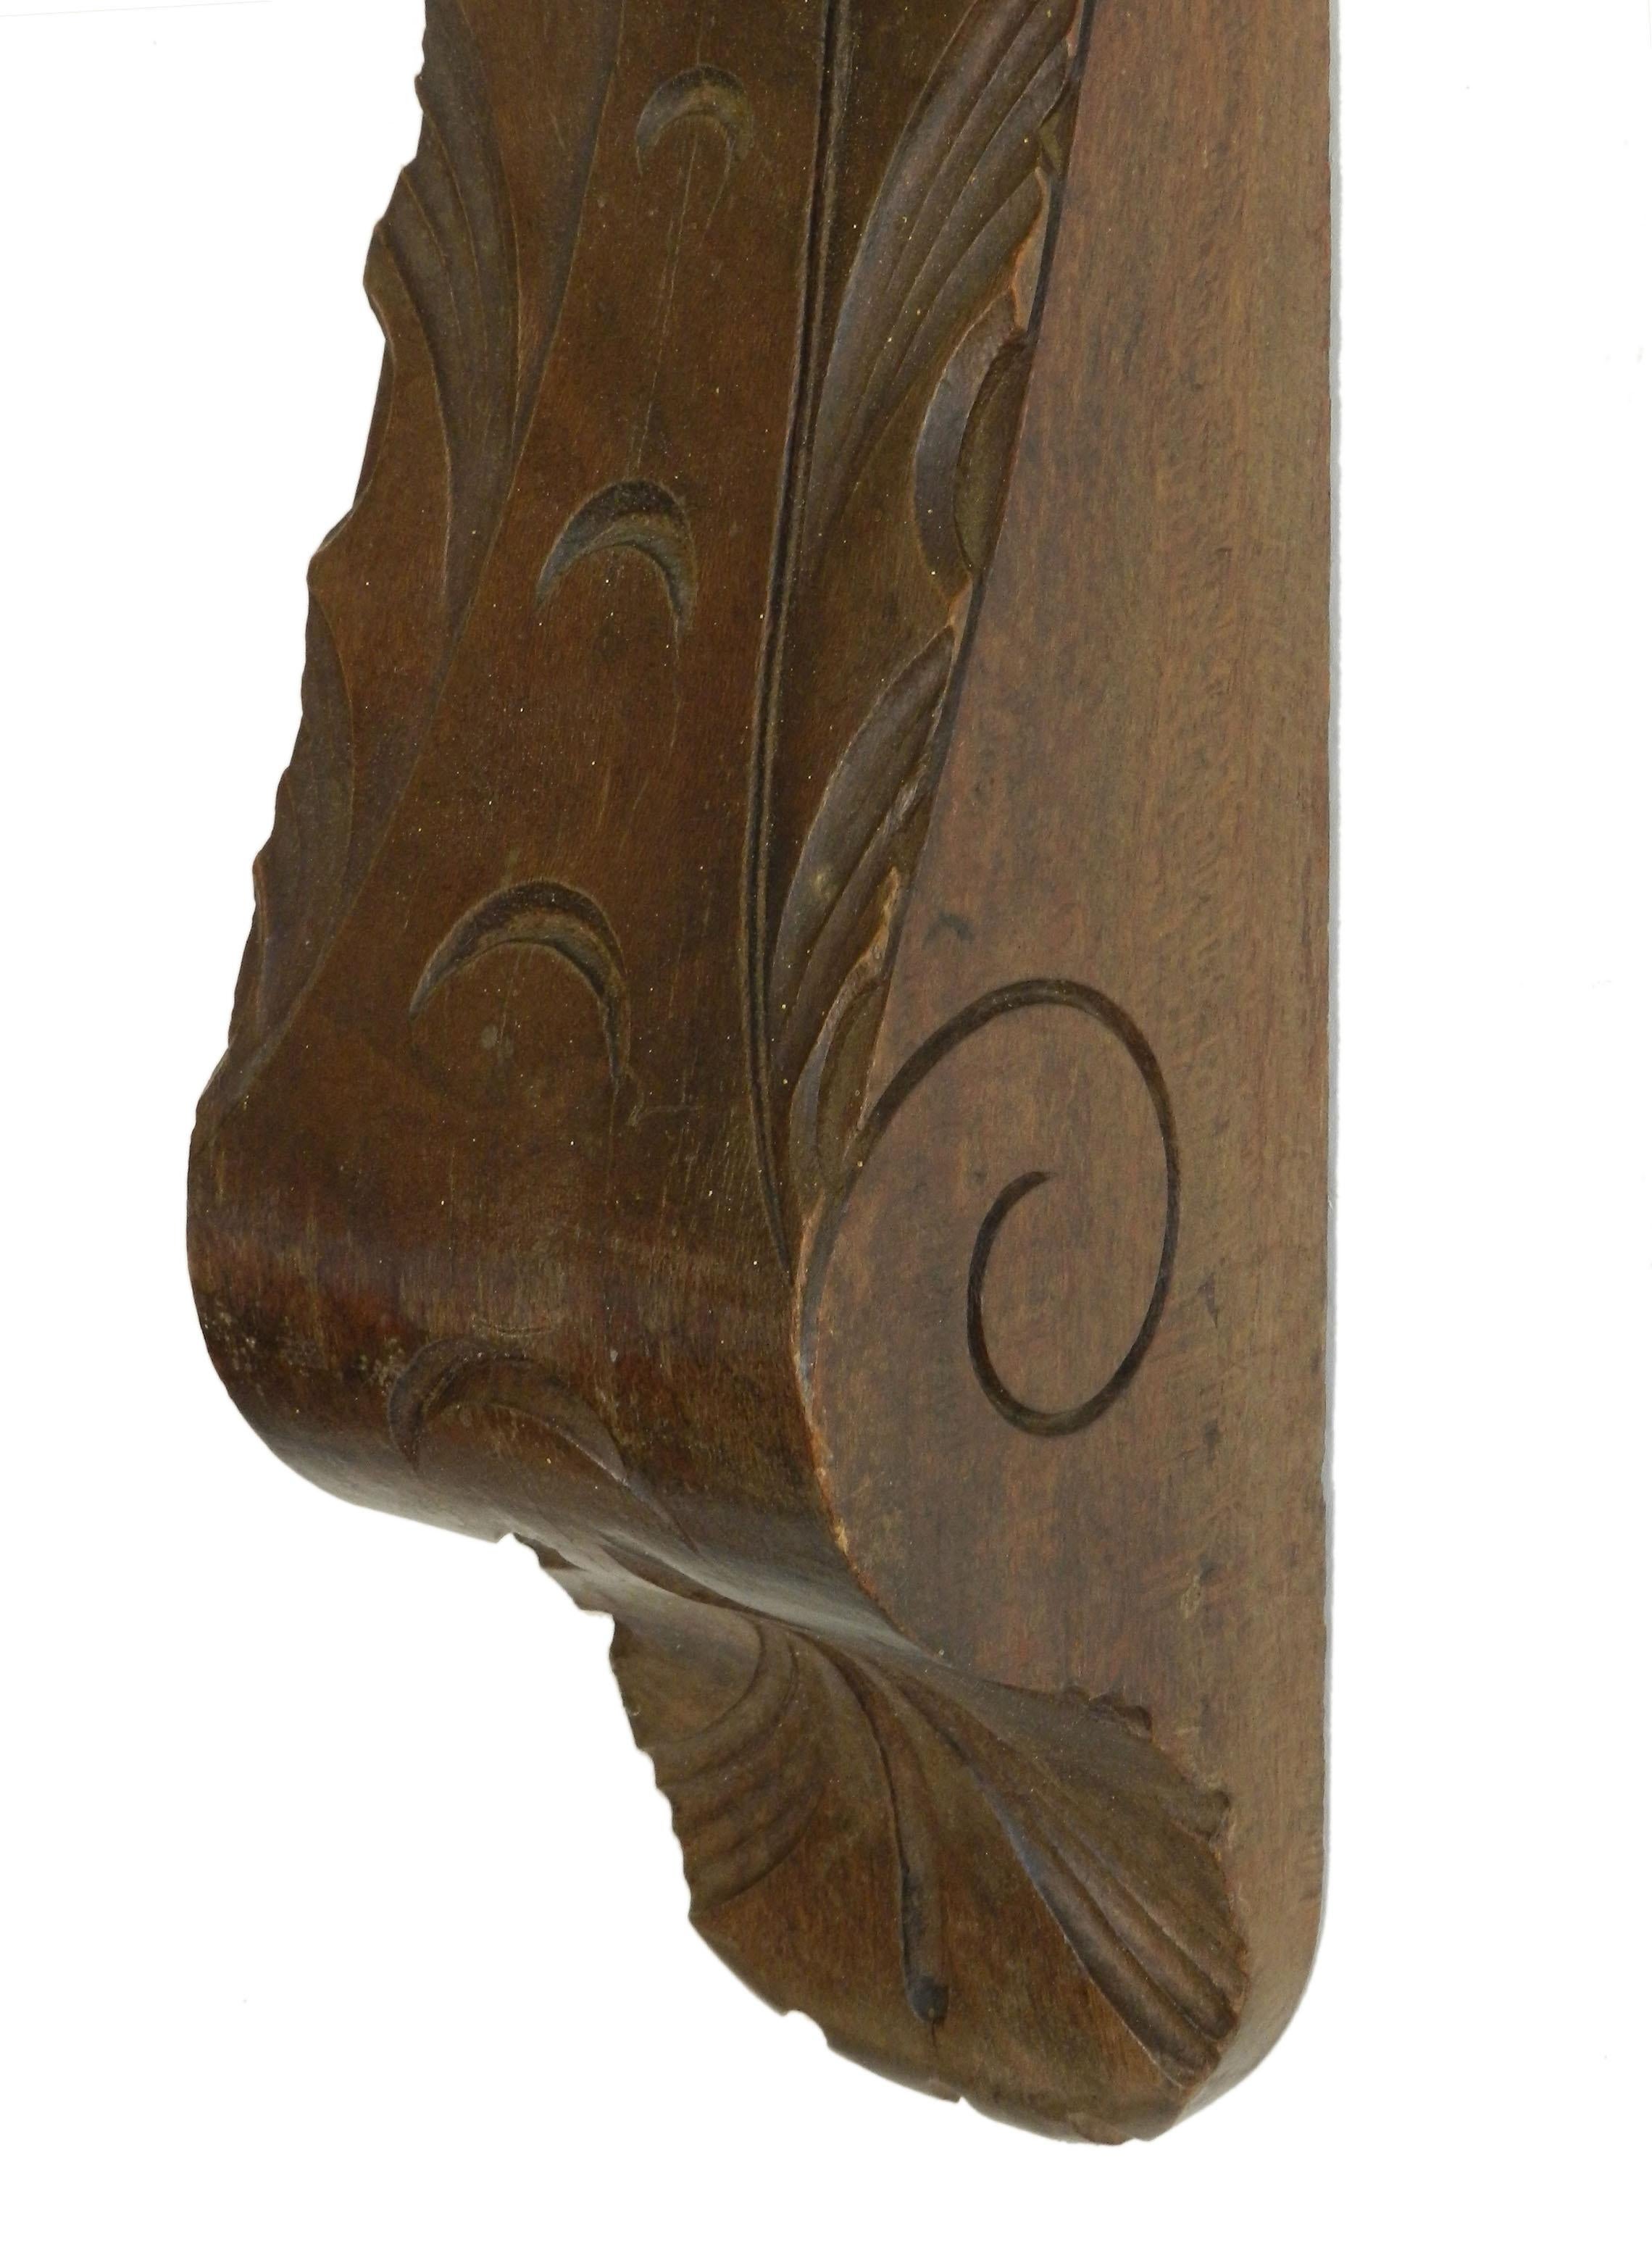 Bohemian Wall Sconce Lantern Light French Basque Sculpted Wood Head, c1920 FREE SHIPPING